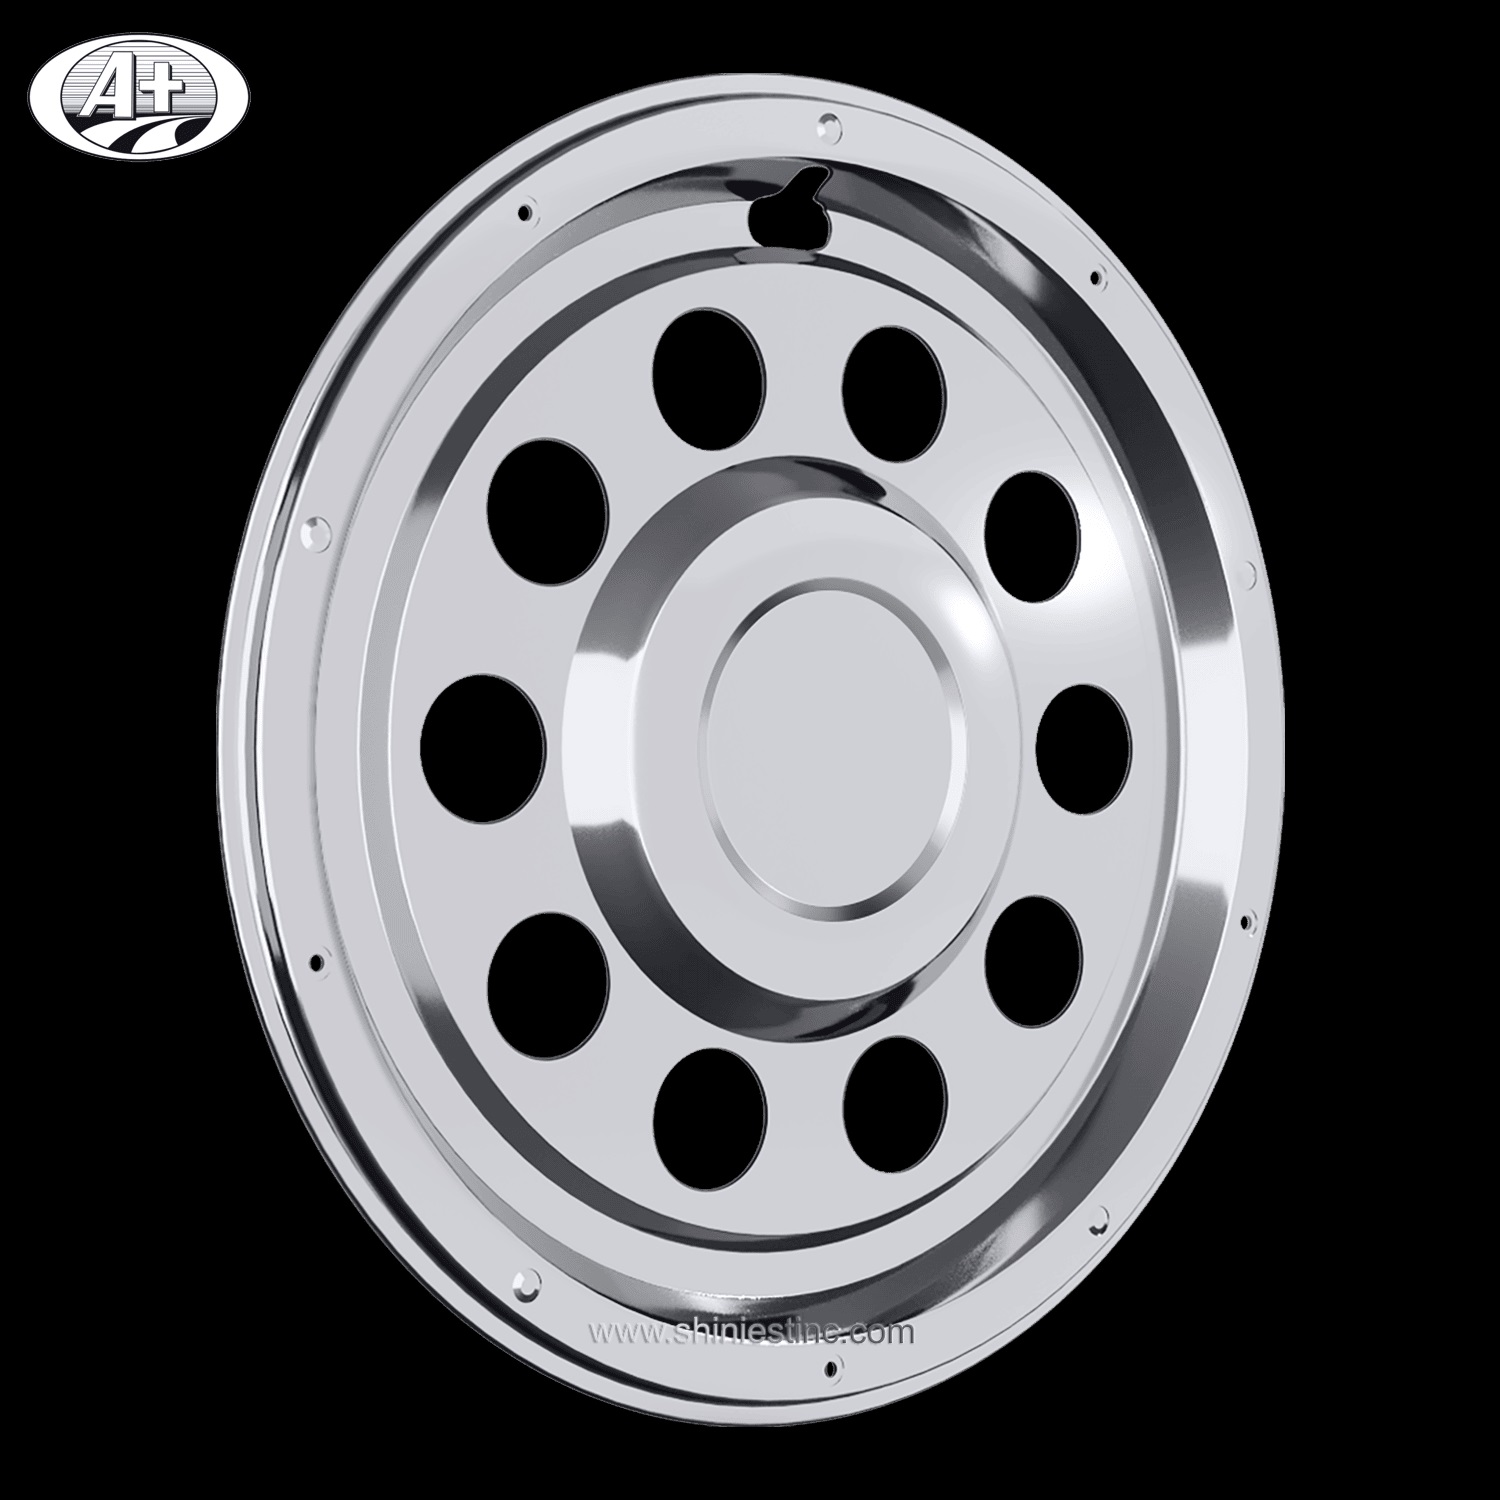 (11225R) 22.5＂Stainless Steel (New Swedish Style) Rear Wheel Cover for Trucks/Buses